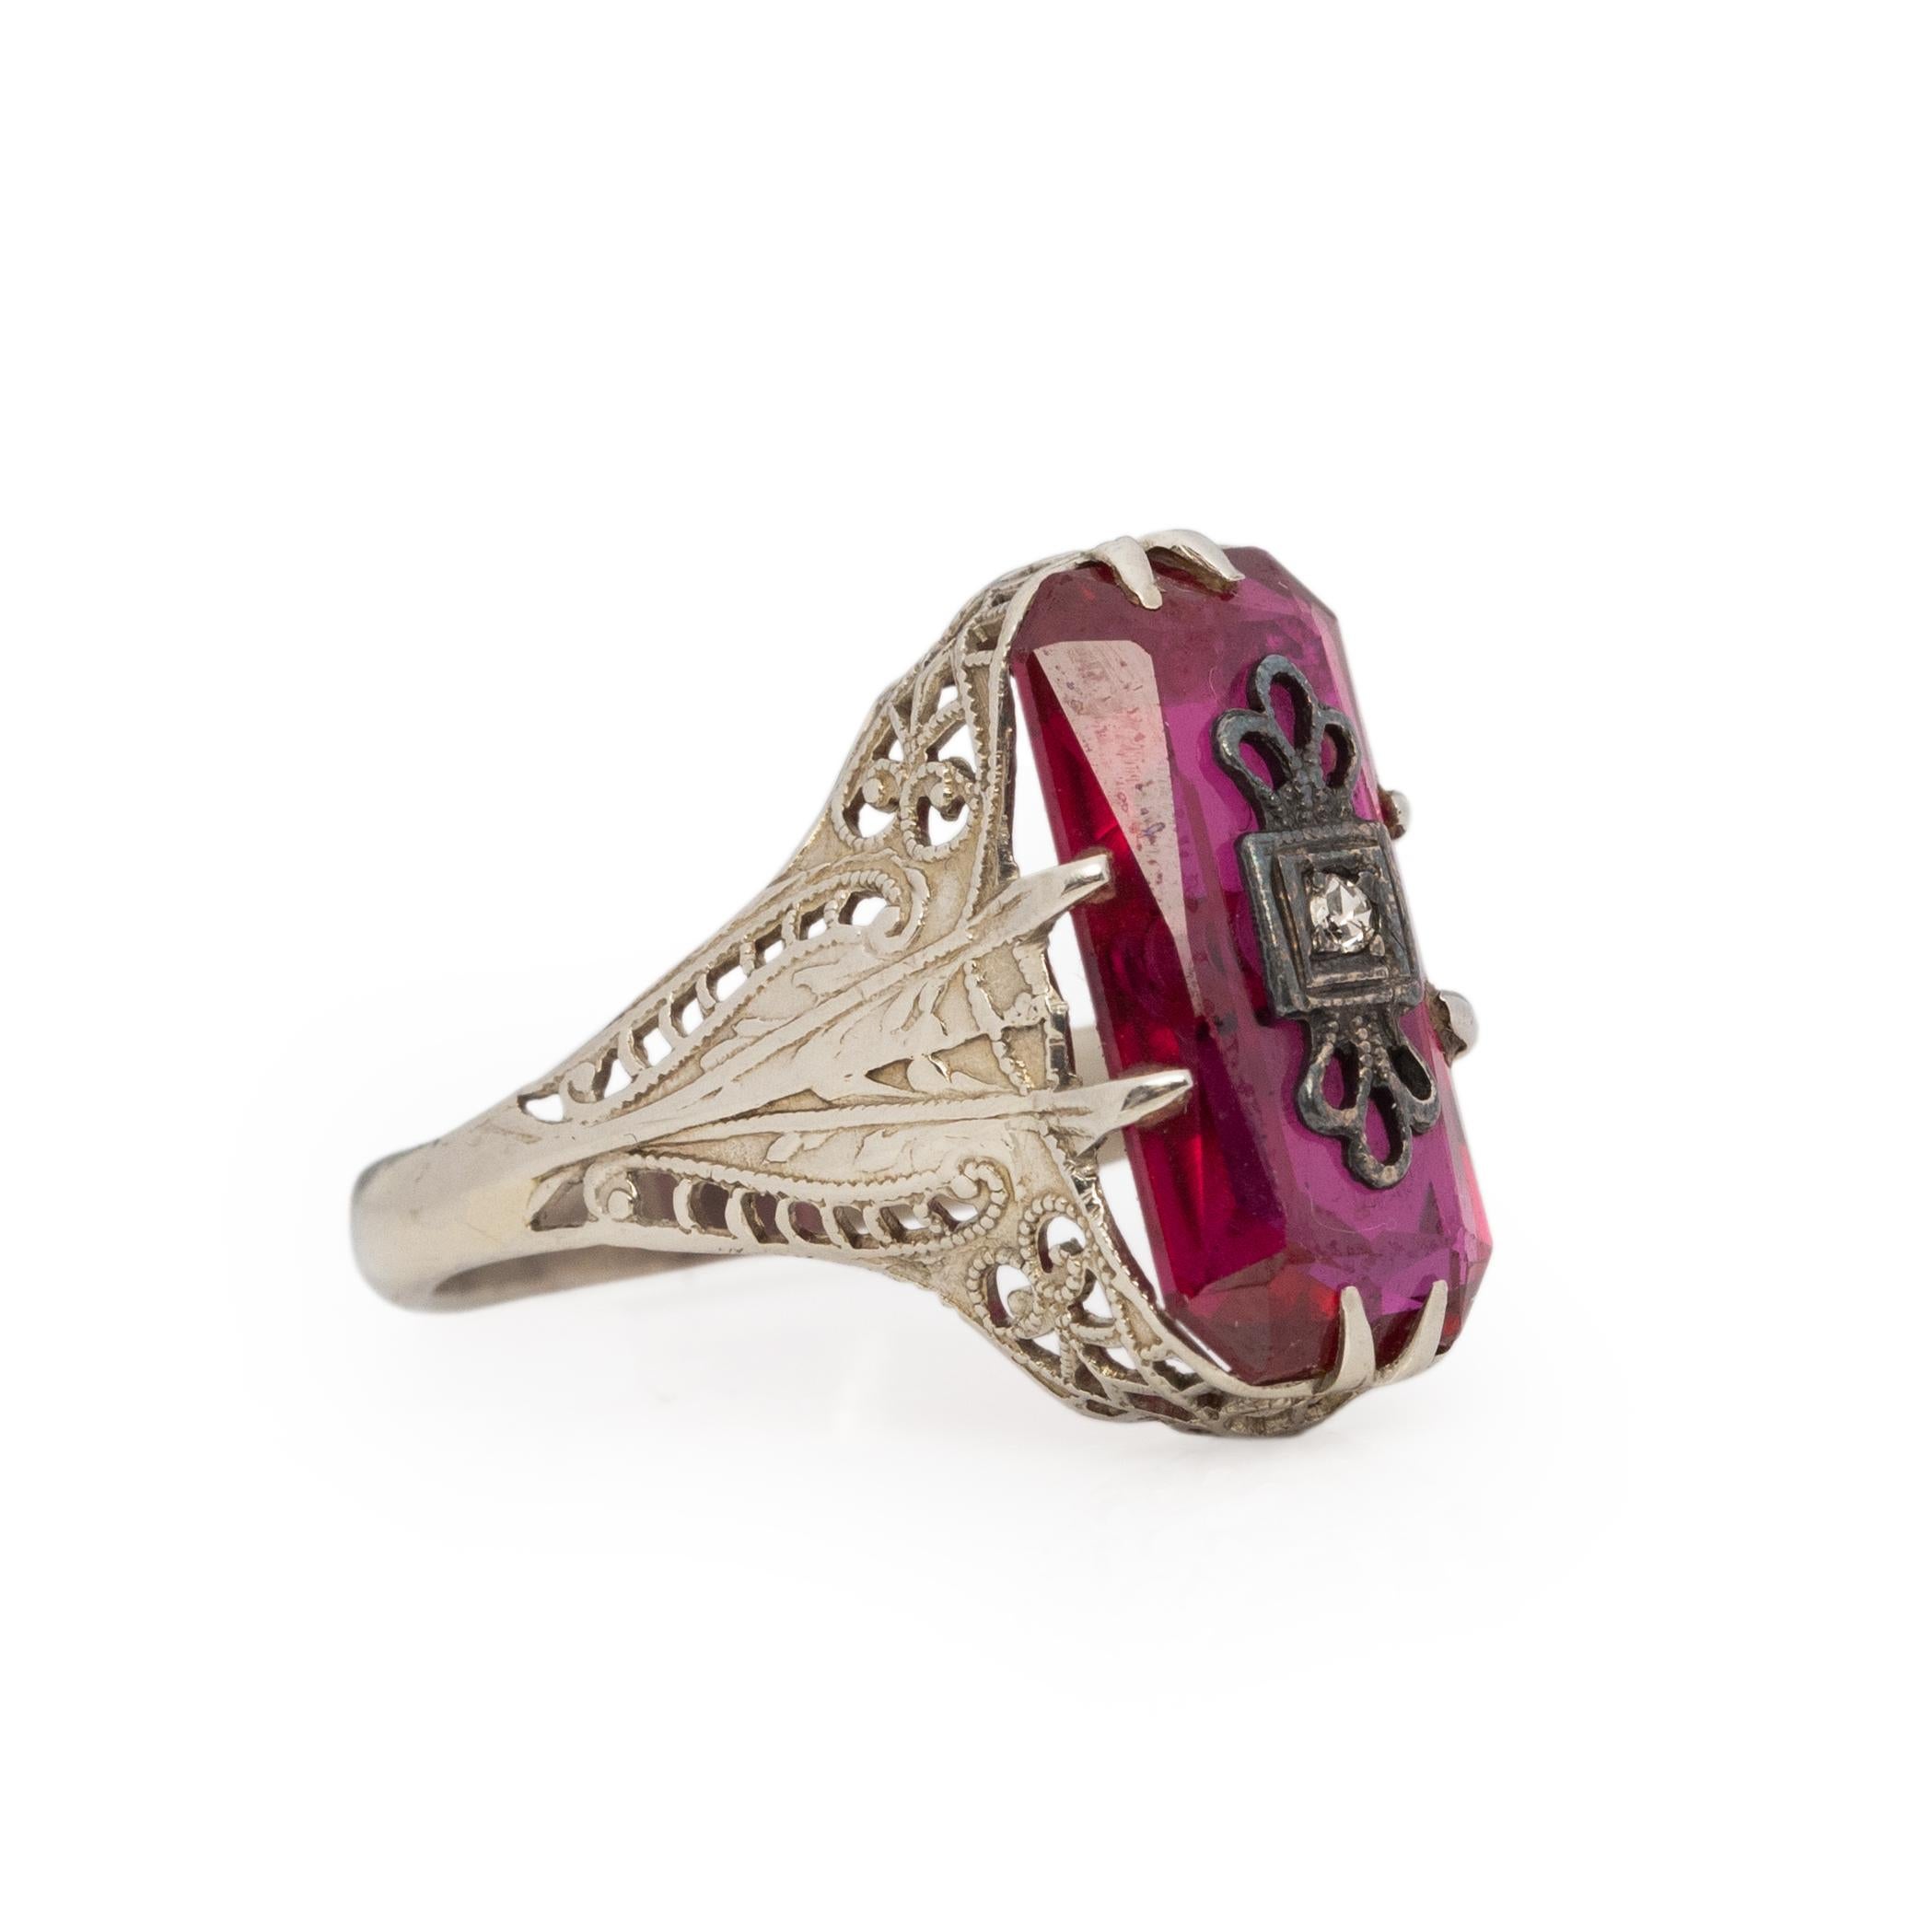 This ring is from the Victorian era, crafted in 14K white gold with intricate filigree details along the shanks and gallery. Held in by 7 prongs the rectangle shaped deep red stone center has a small diamond detail affixed to the center. Giving off